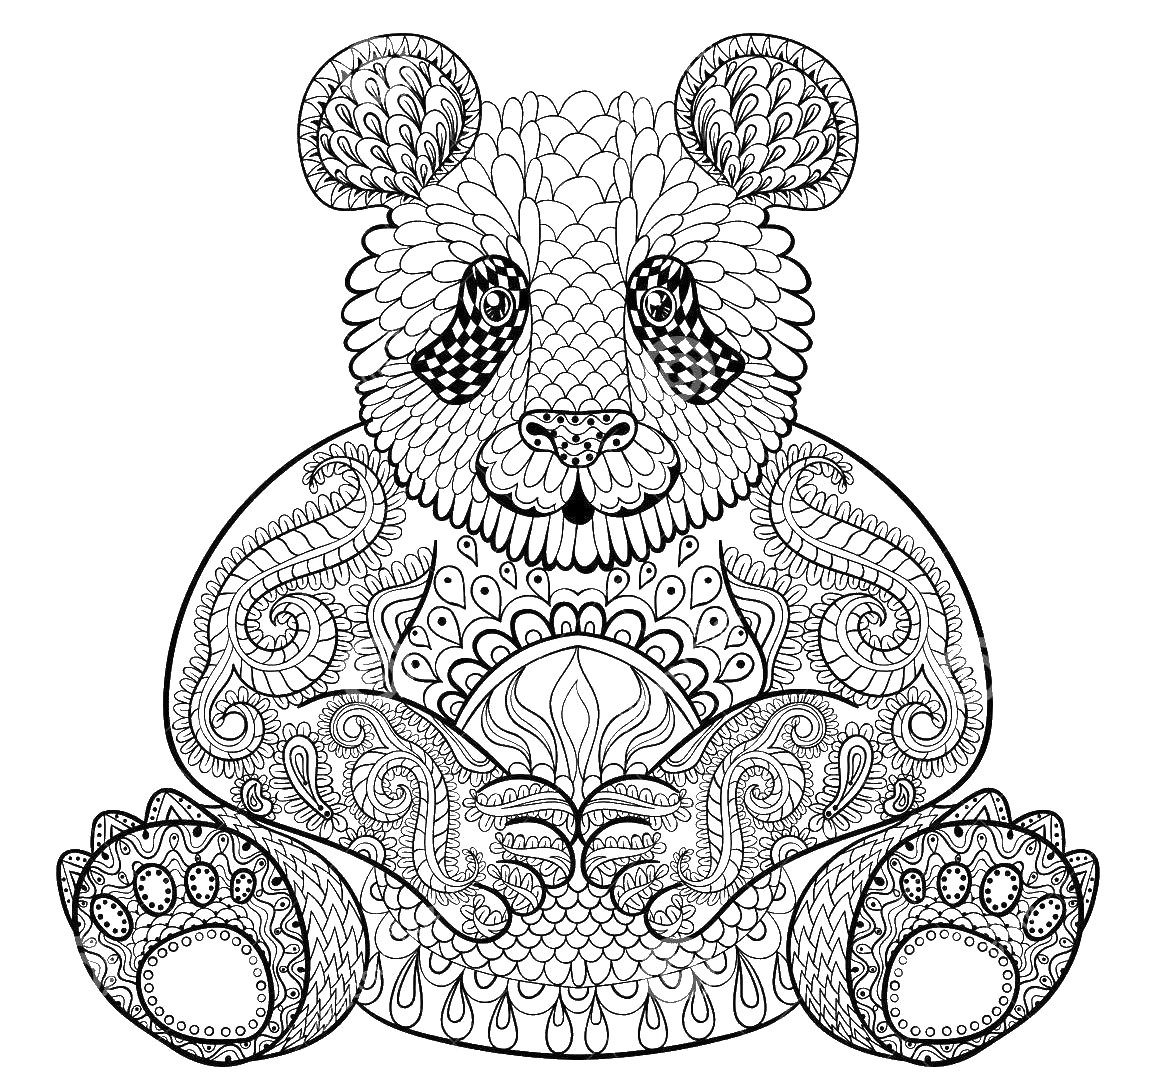 Hard Animal Coloring Pages Coloring Pages Marvelous Coloring Pages Hard Animals Adult For